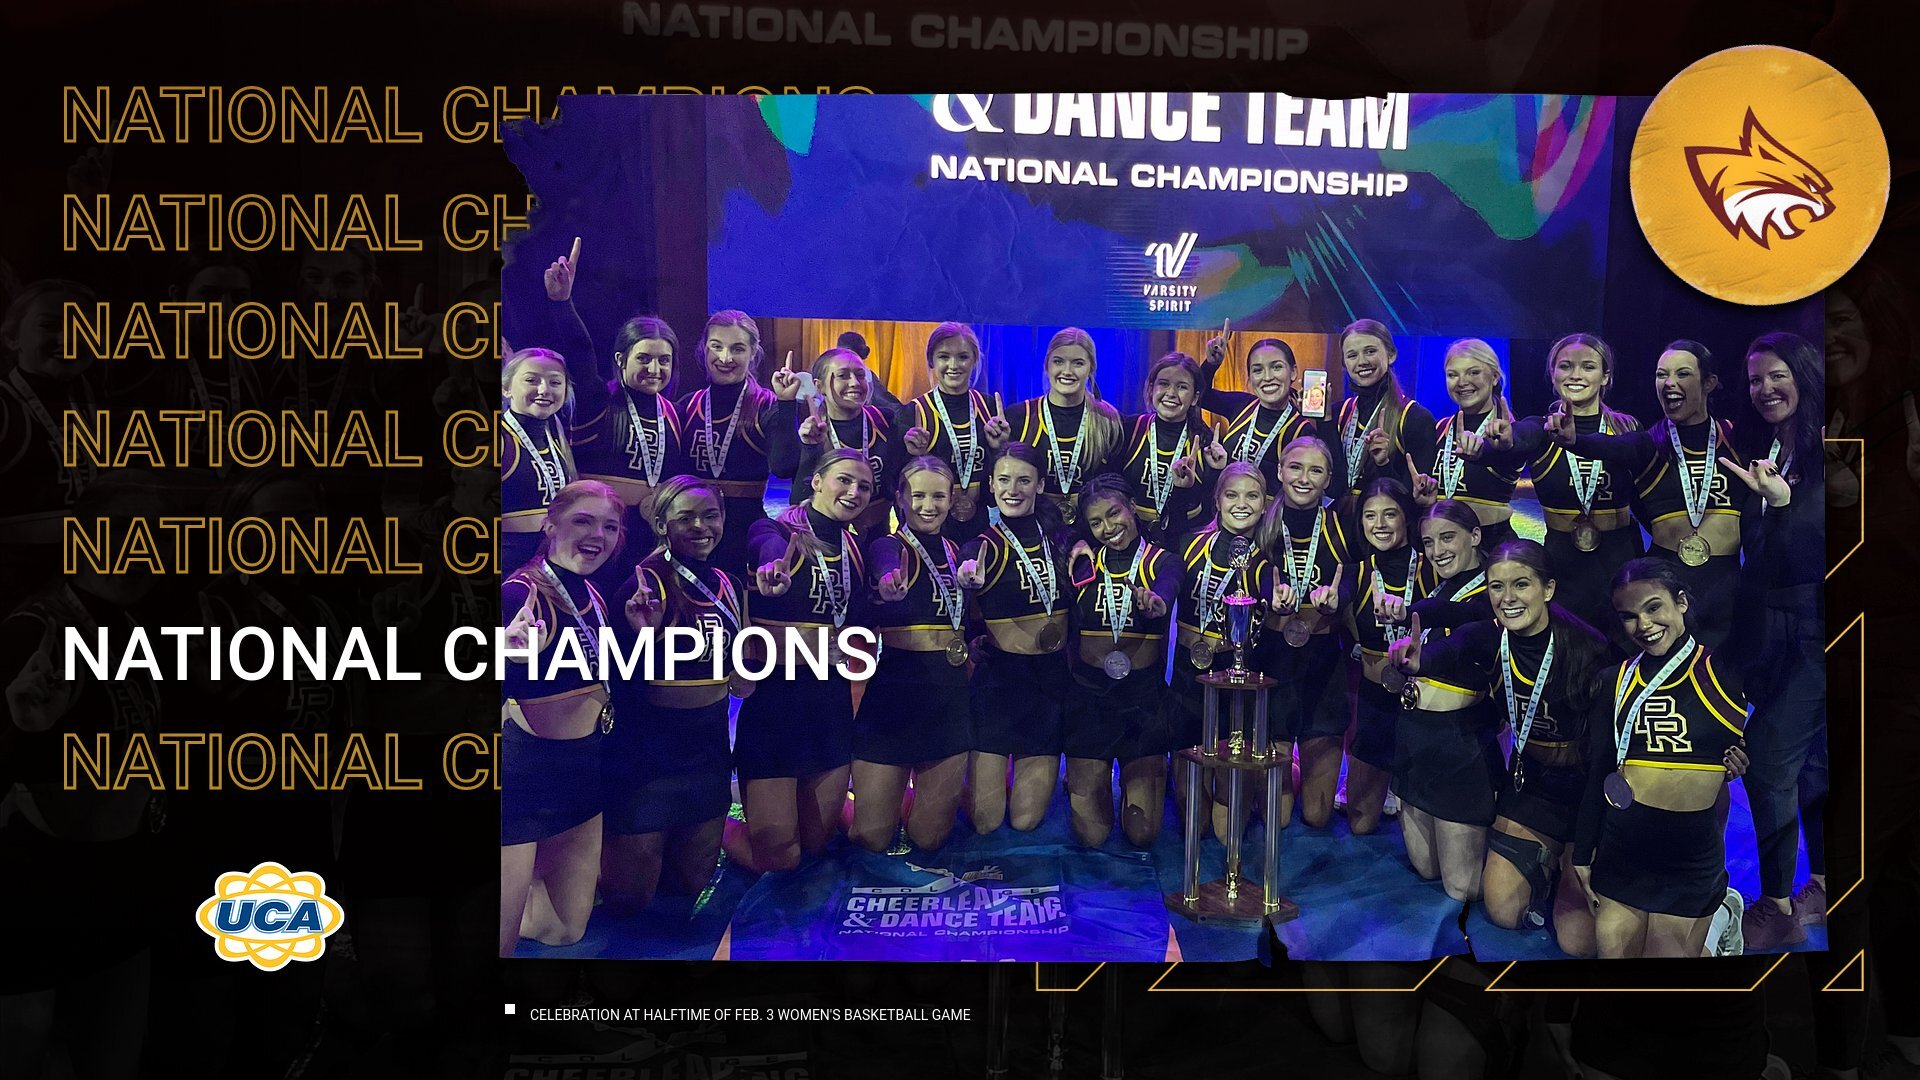 Join us Feb. 3 to honor PRCC’s UCA National Championship